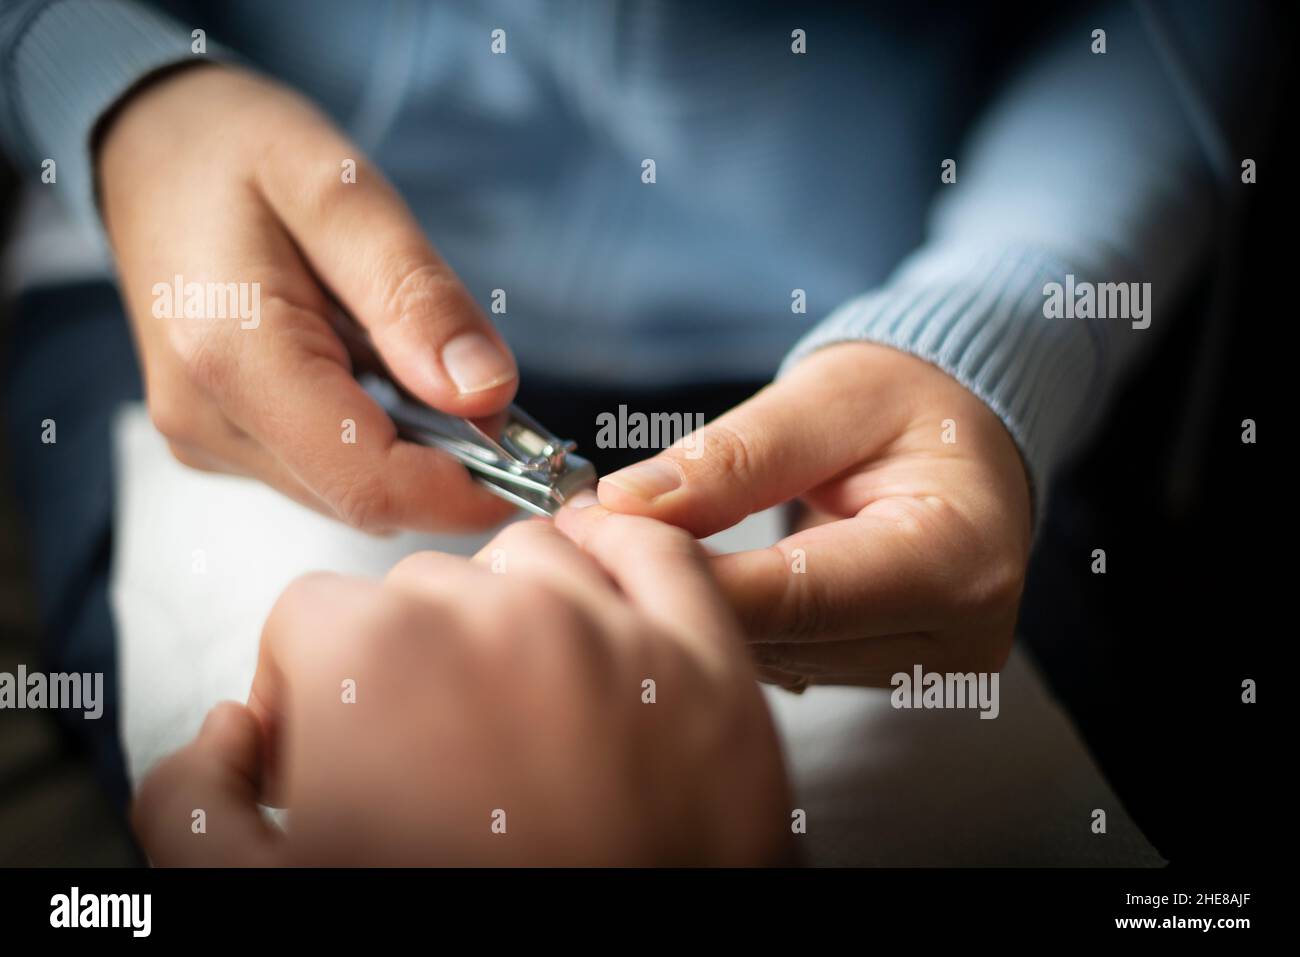 Woman cuts persons fingernails with nail clippers-close-up Stock Photo